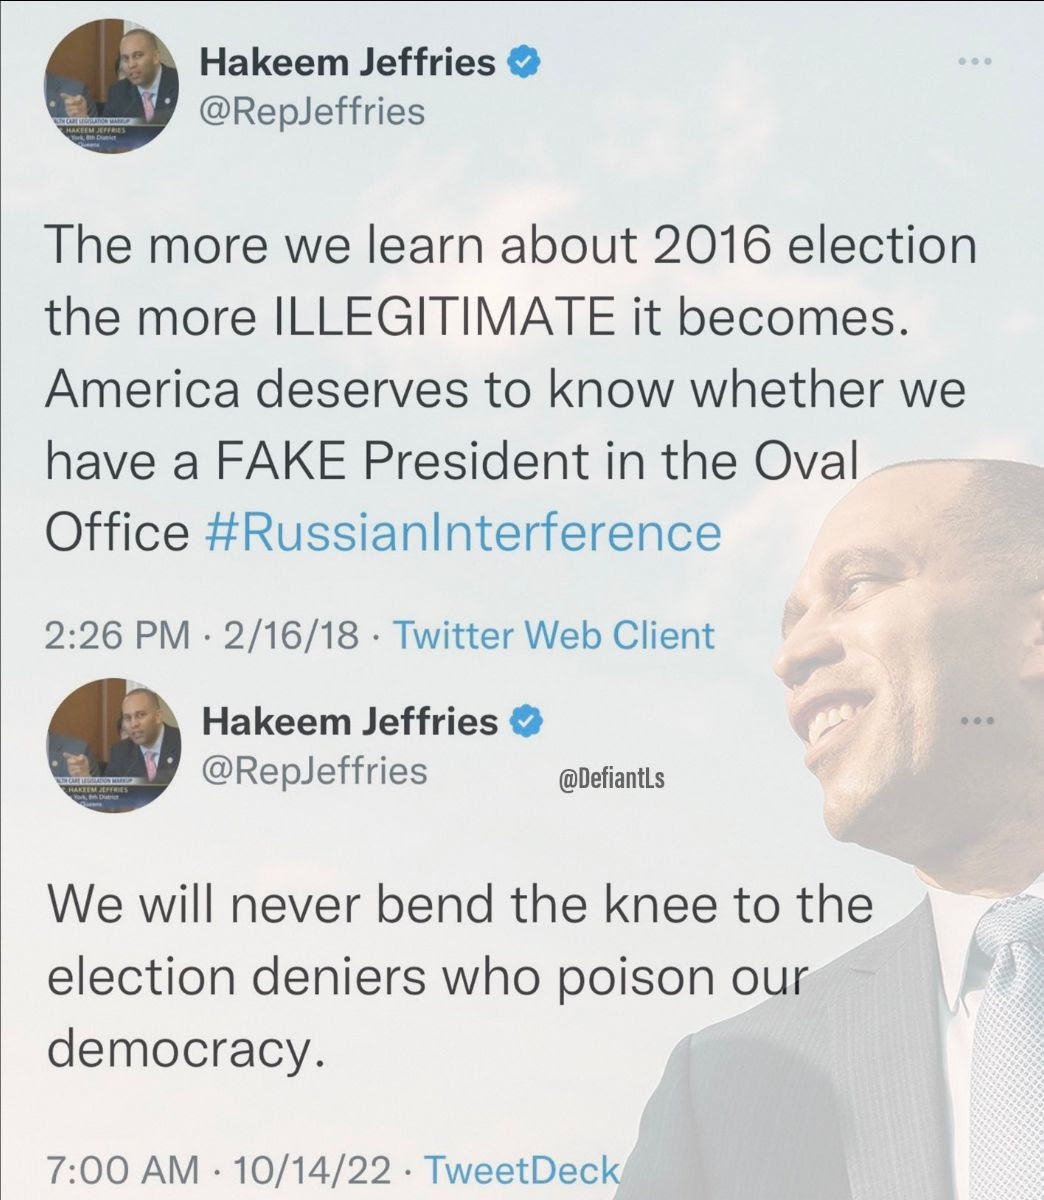 Hypocrite: Hakeem Jeffries. In 2016 he denies the election results then in 2020 condemns anyone who denies election results.